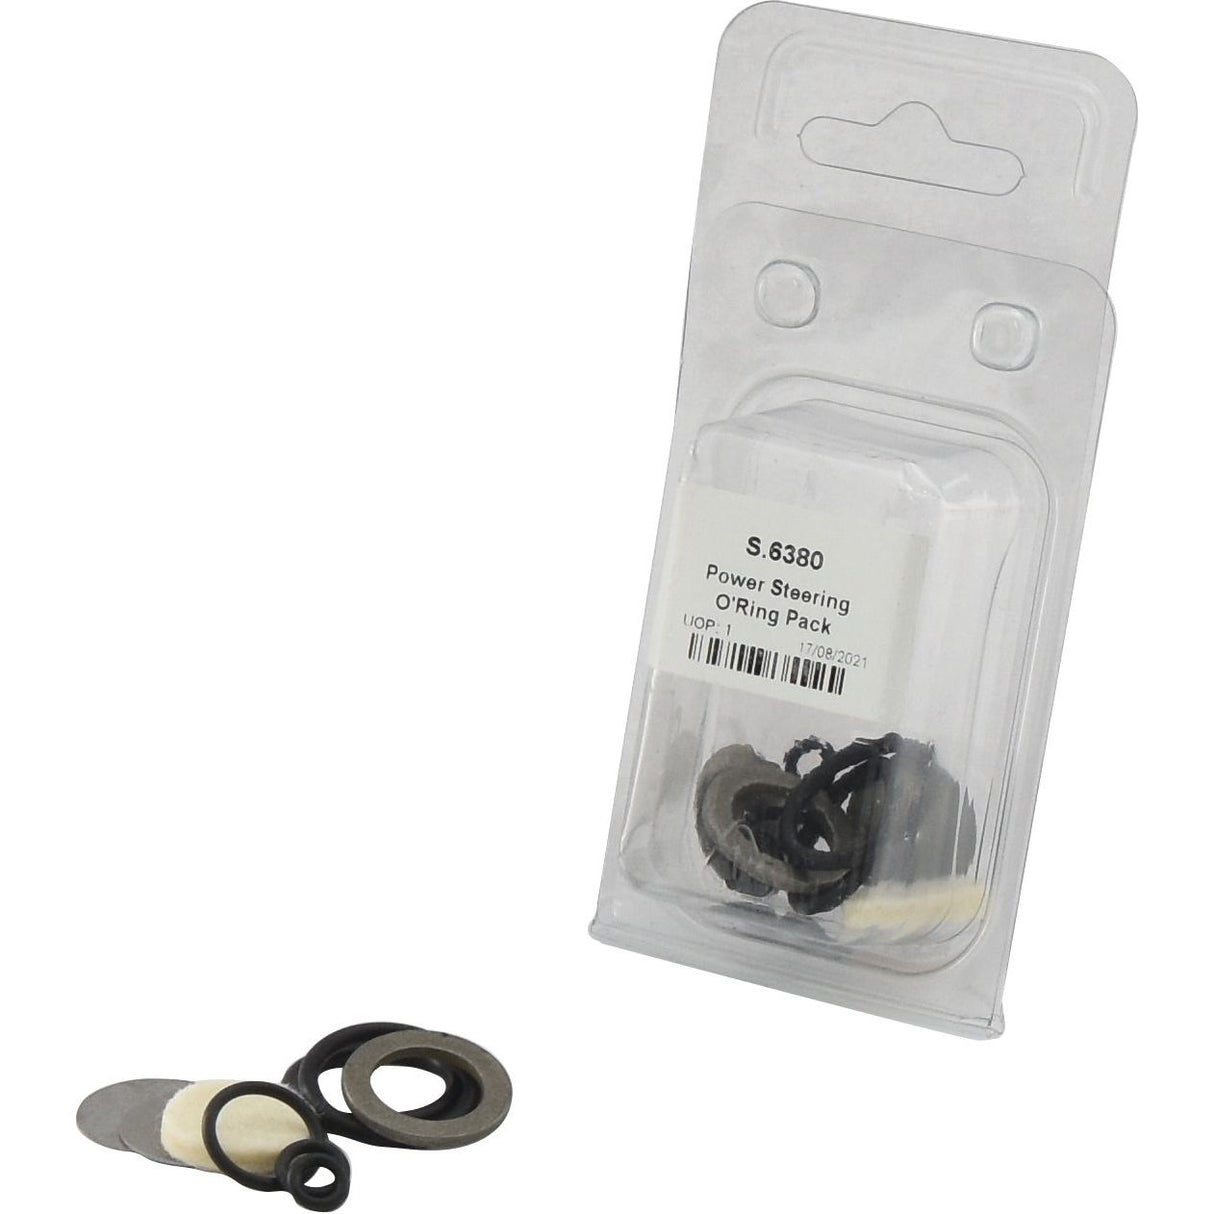 Power Steering O\'Ring Pack
 - S.6380 - Farming Parts